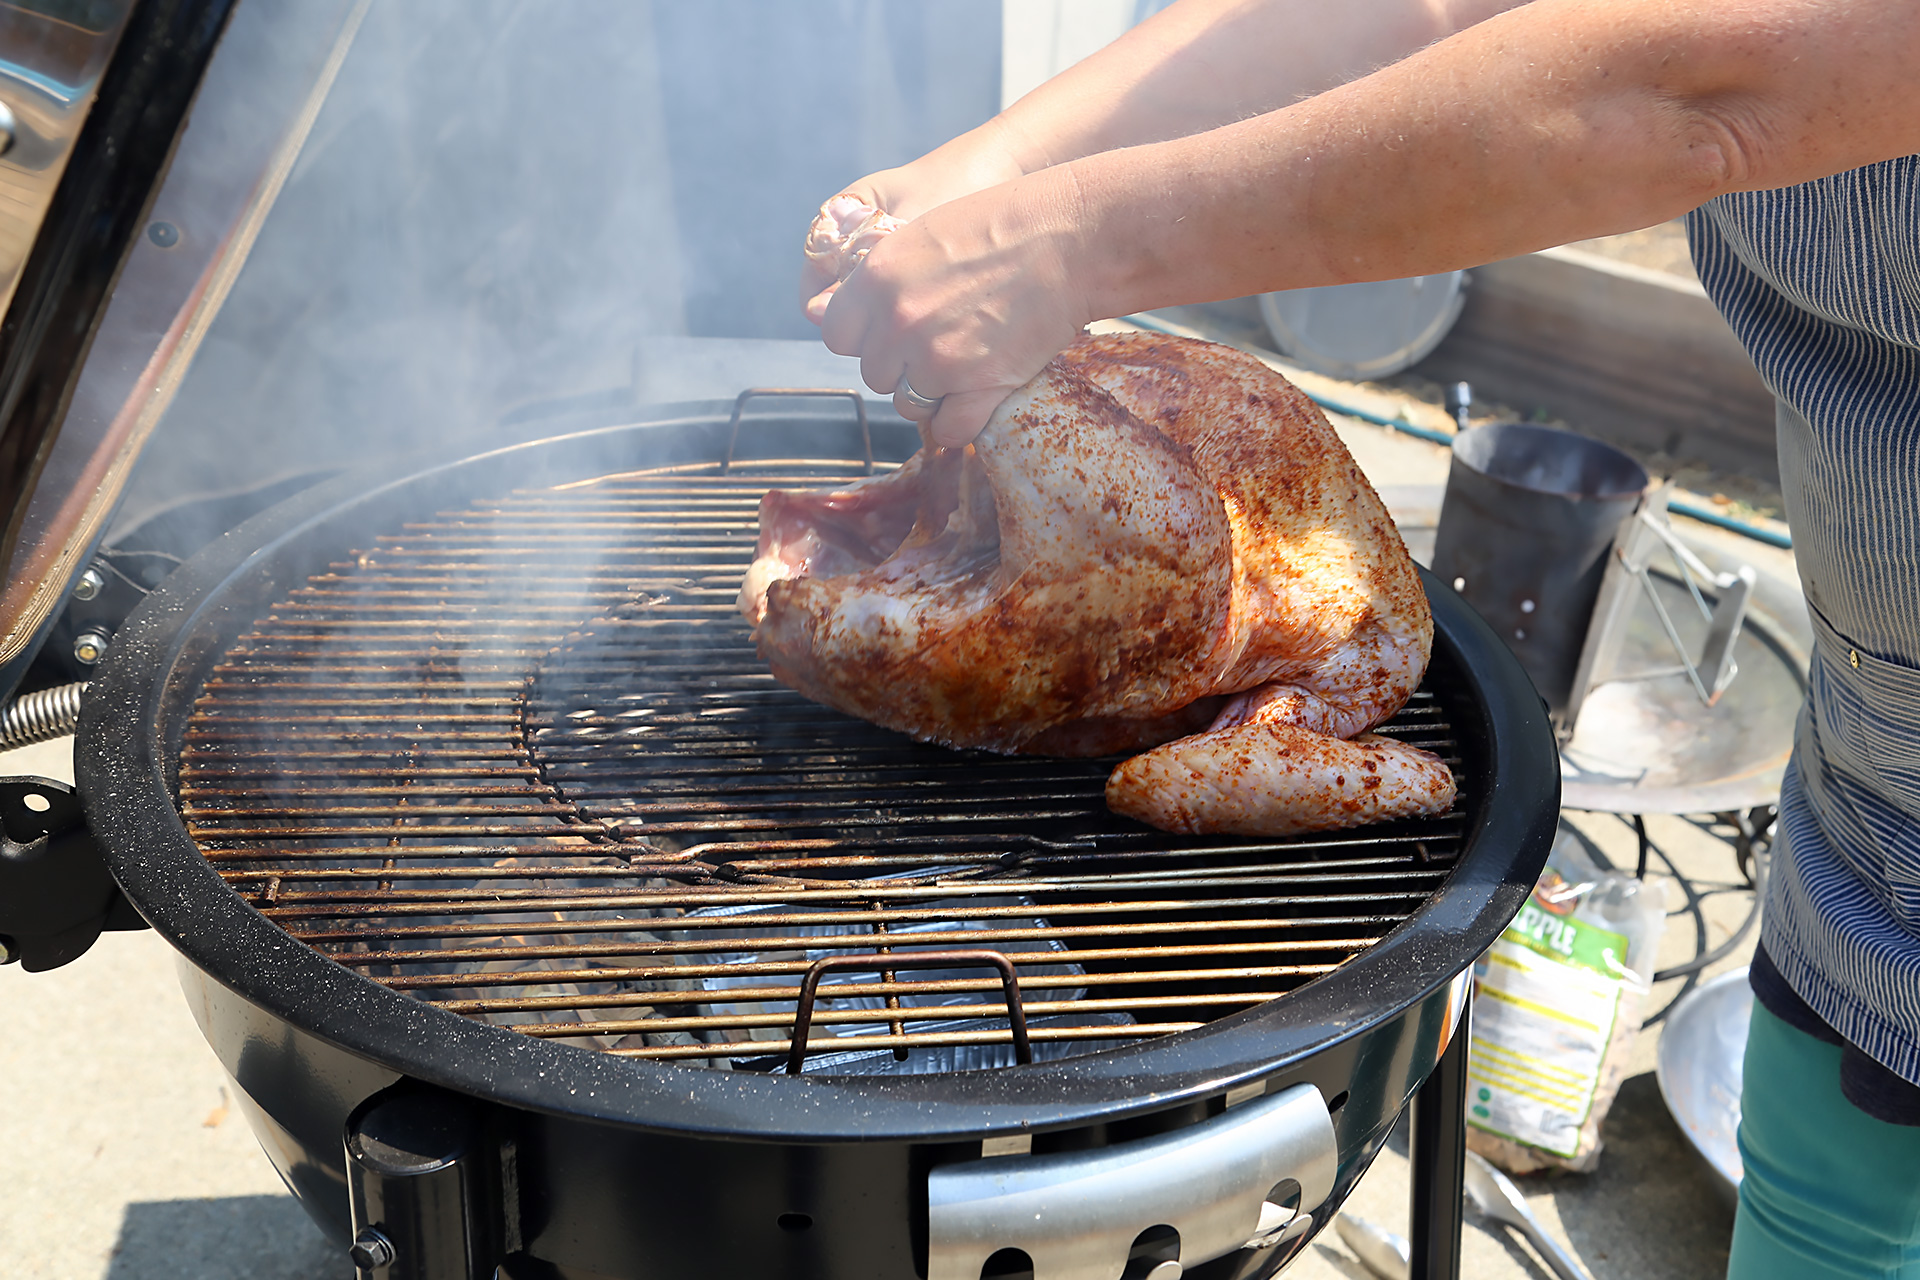 osition the cooking grate in place, then place the turkey over the drip pan with the legs facing toward the coals.